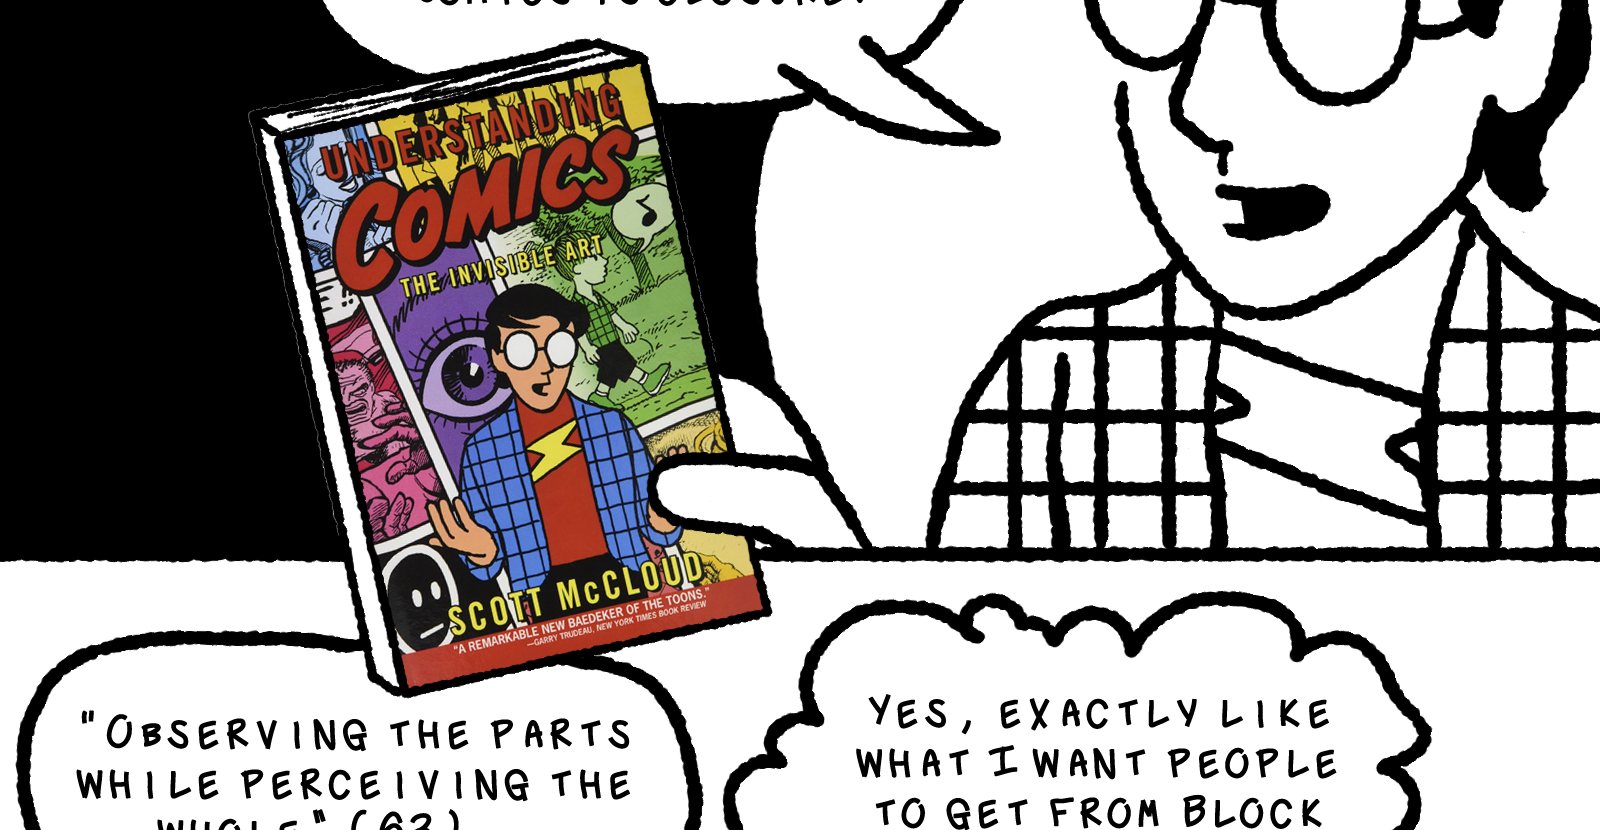 In a new panel, Scott McCloud has a sort of spotlight drawn on him. He's holding up his book Understanding Comics, and it breaks through the edge of the panel as if he's handing it to the viewer. He says, Closure allows us to unify temporally fragmented panels across a page into one line of action (67)! I meant it when I said, Comics is closure!